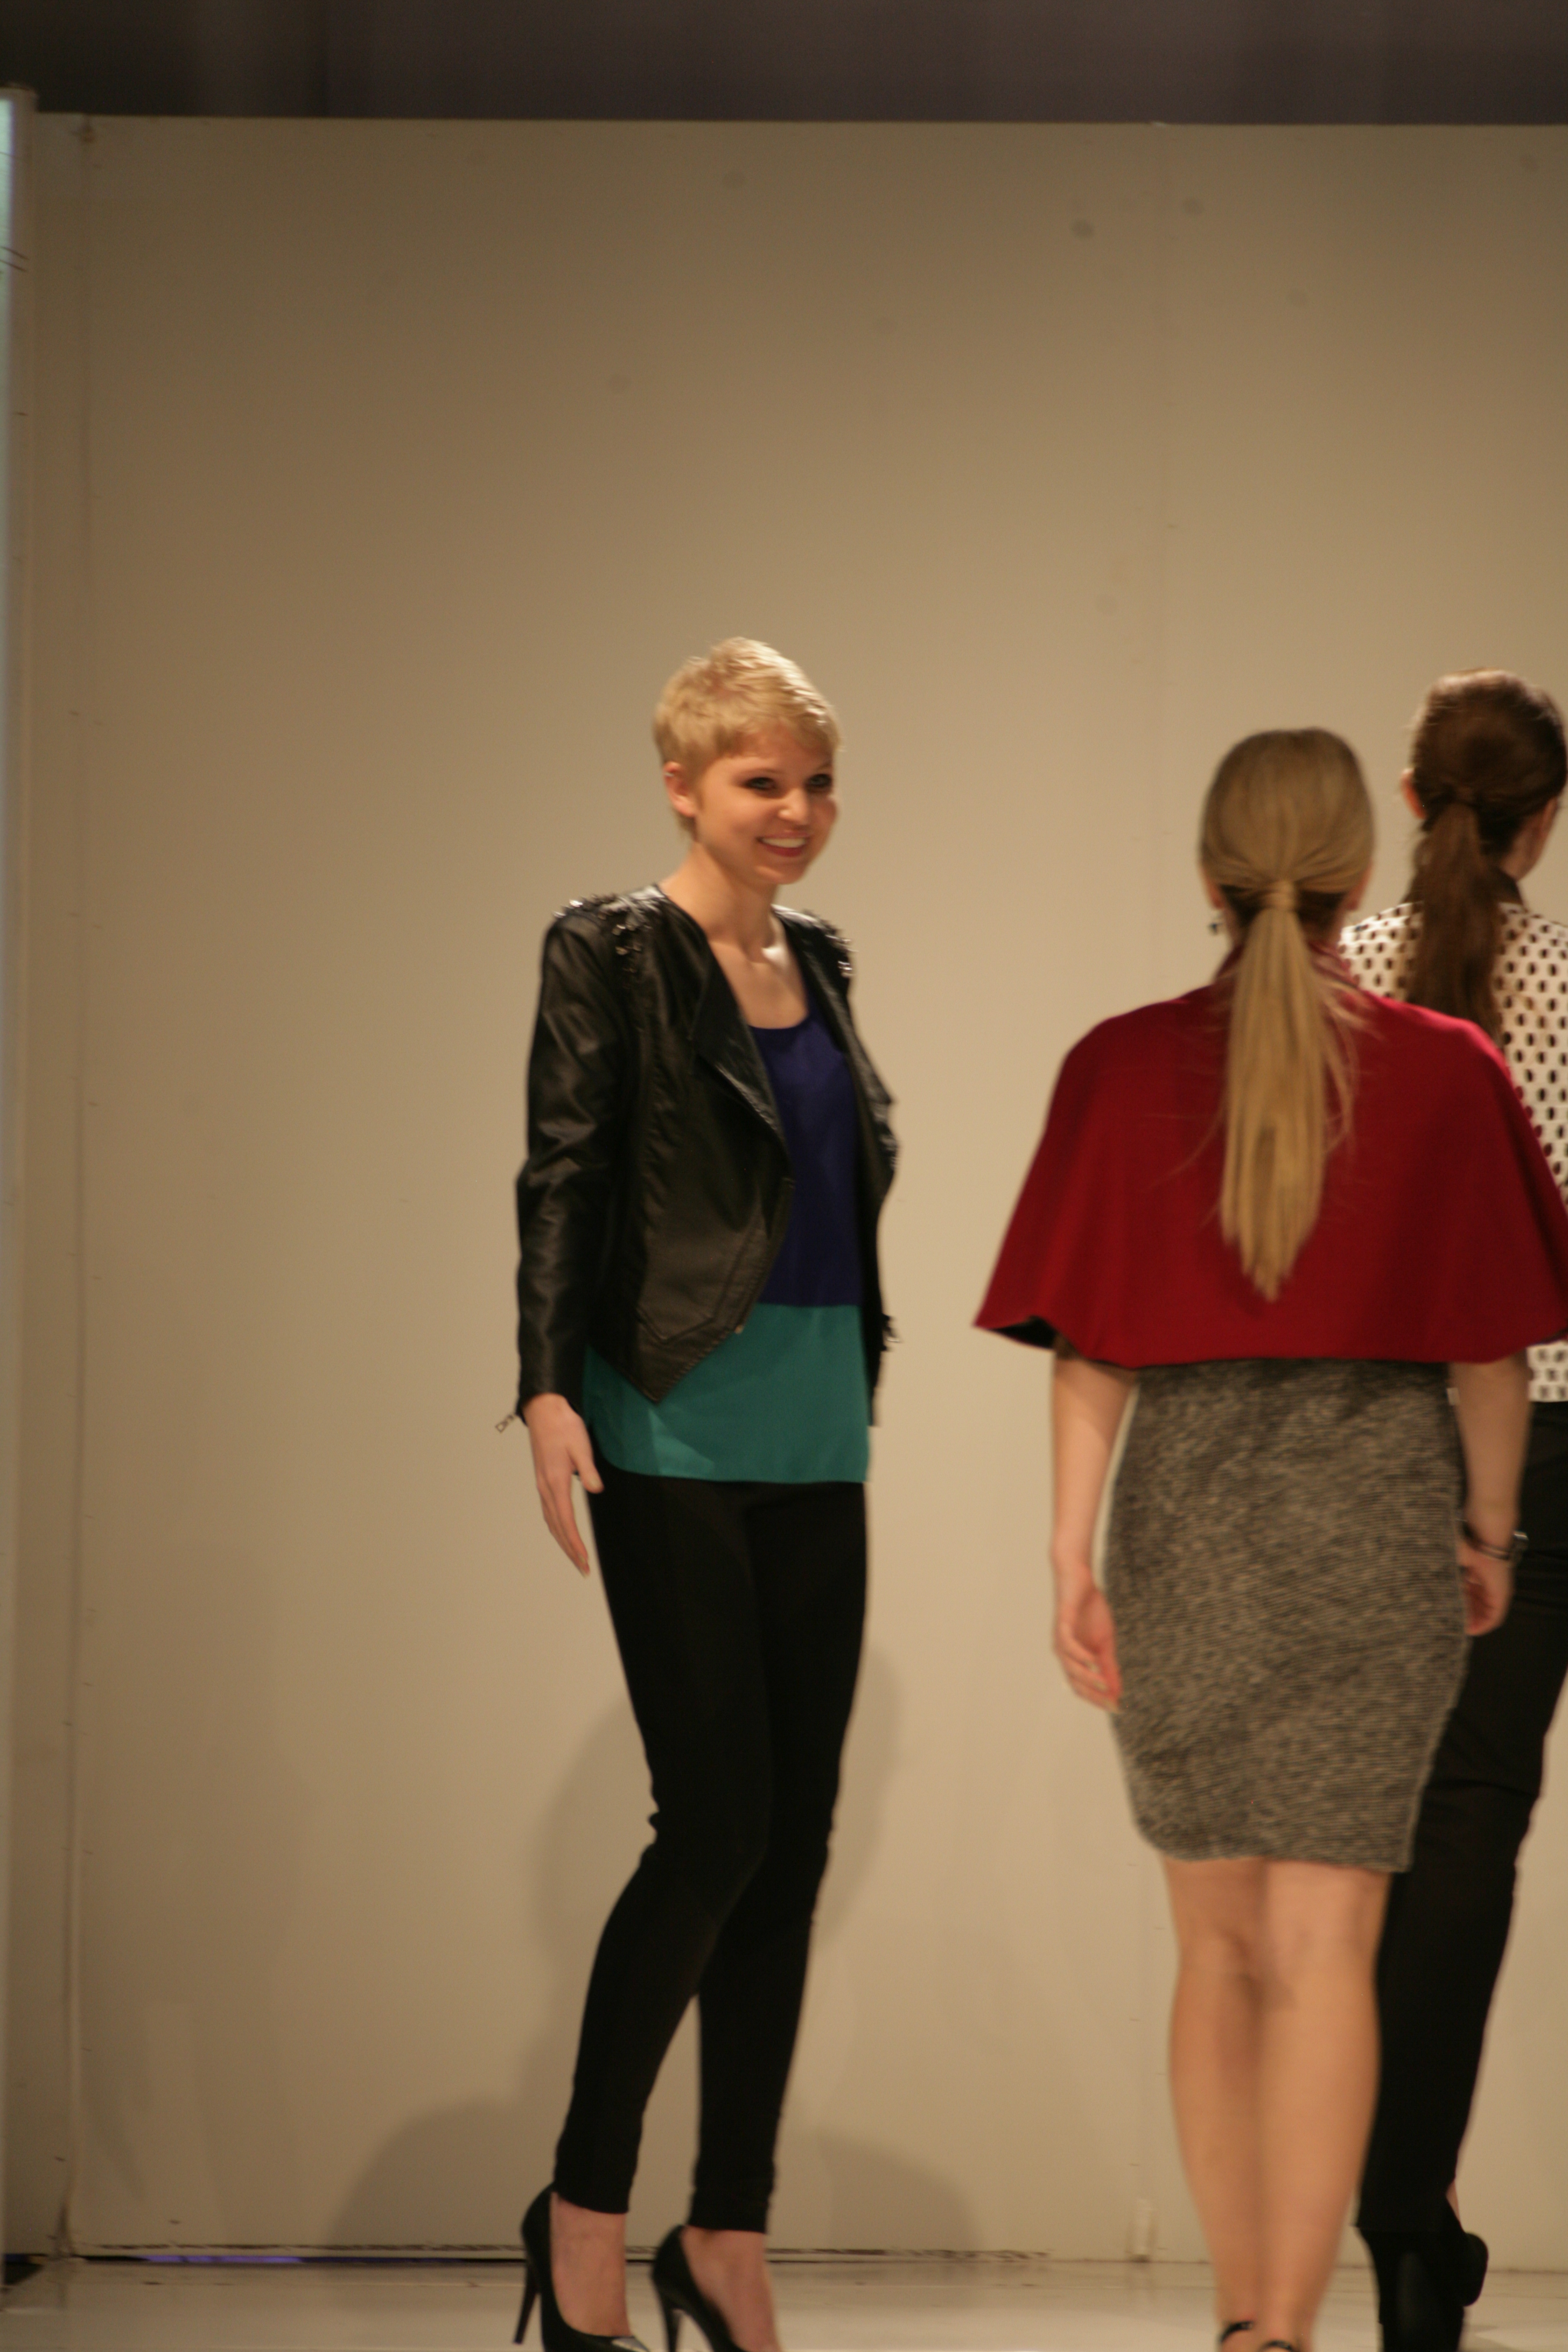 Kelly Druce with her Collection | Birmingham Fashion Week 2013Photo Credit: Vintage Inspired Passionista